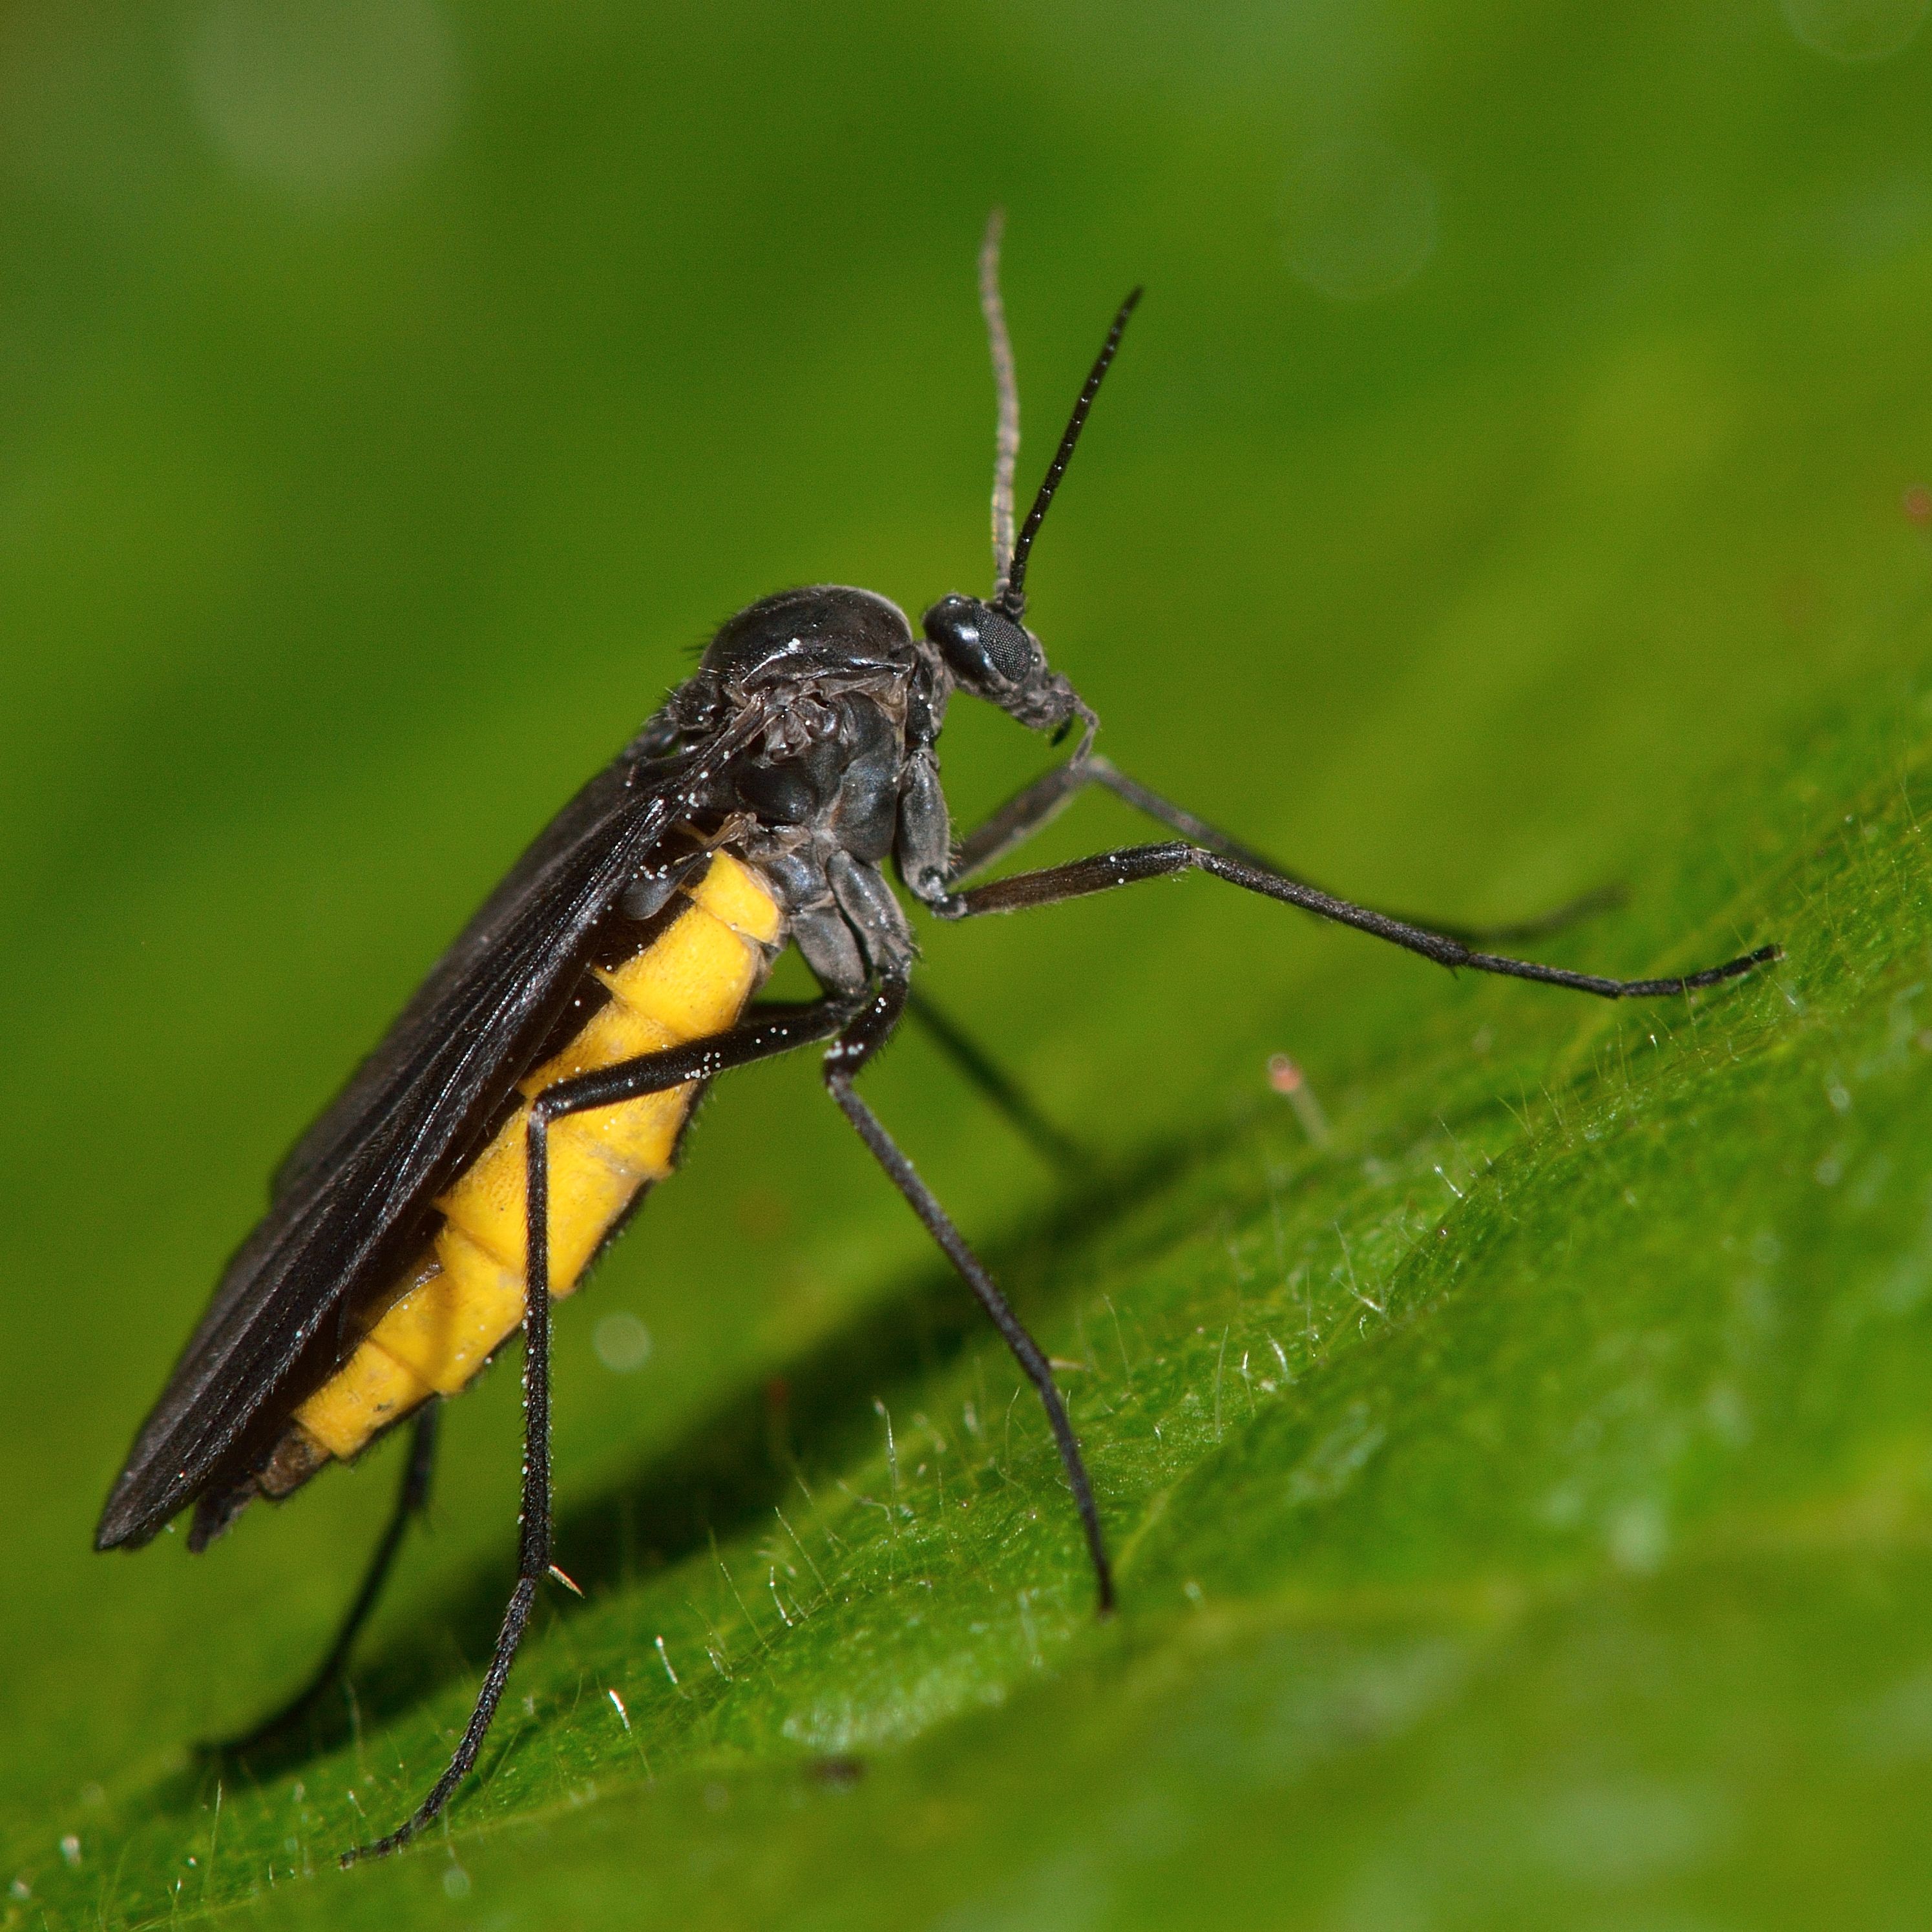 a macro shot of a single fungus gnat on a leaf, it has a yellow underside and long black legs